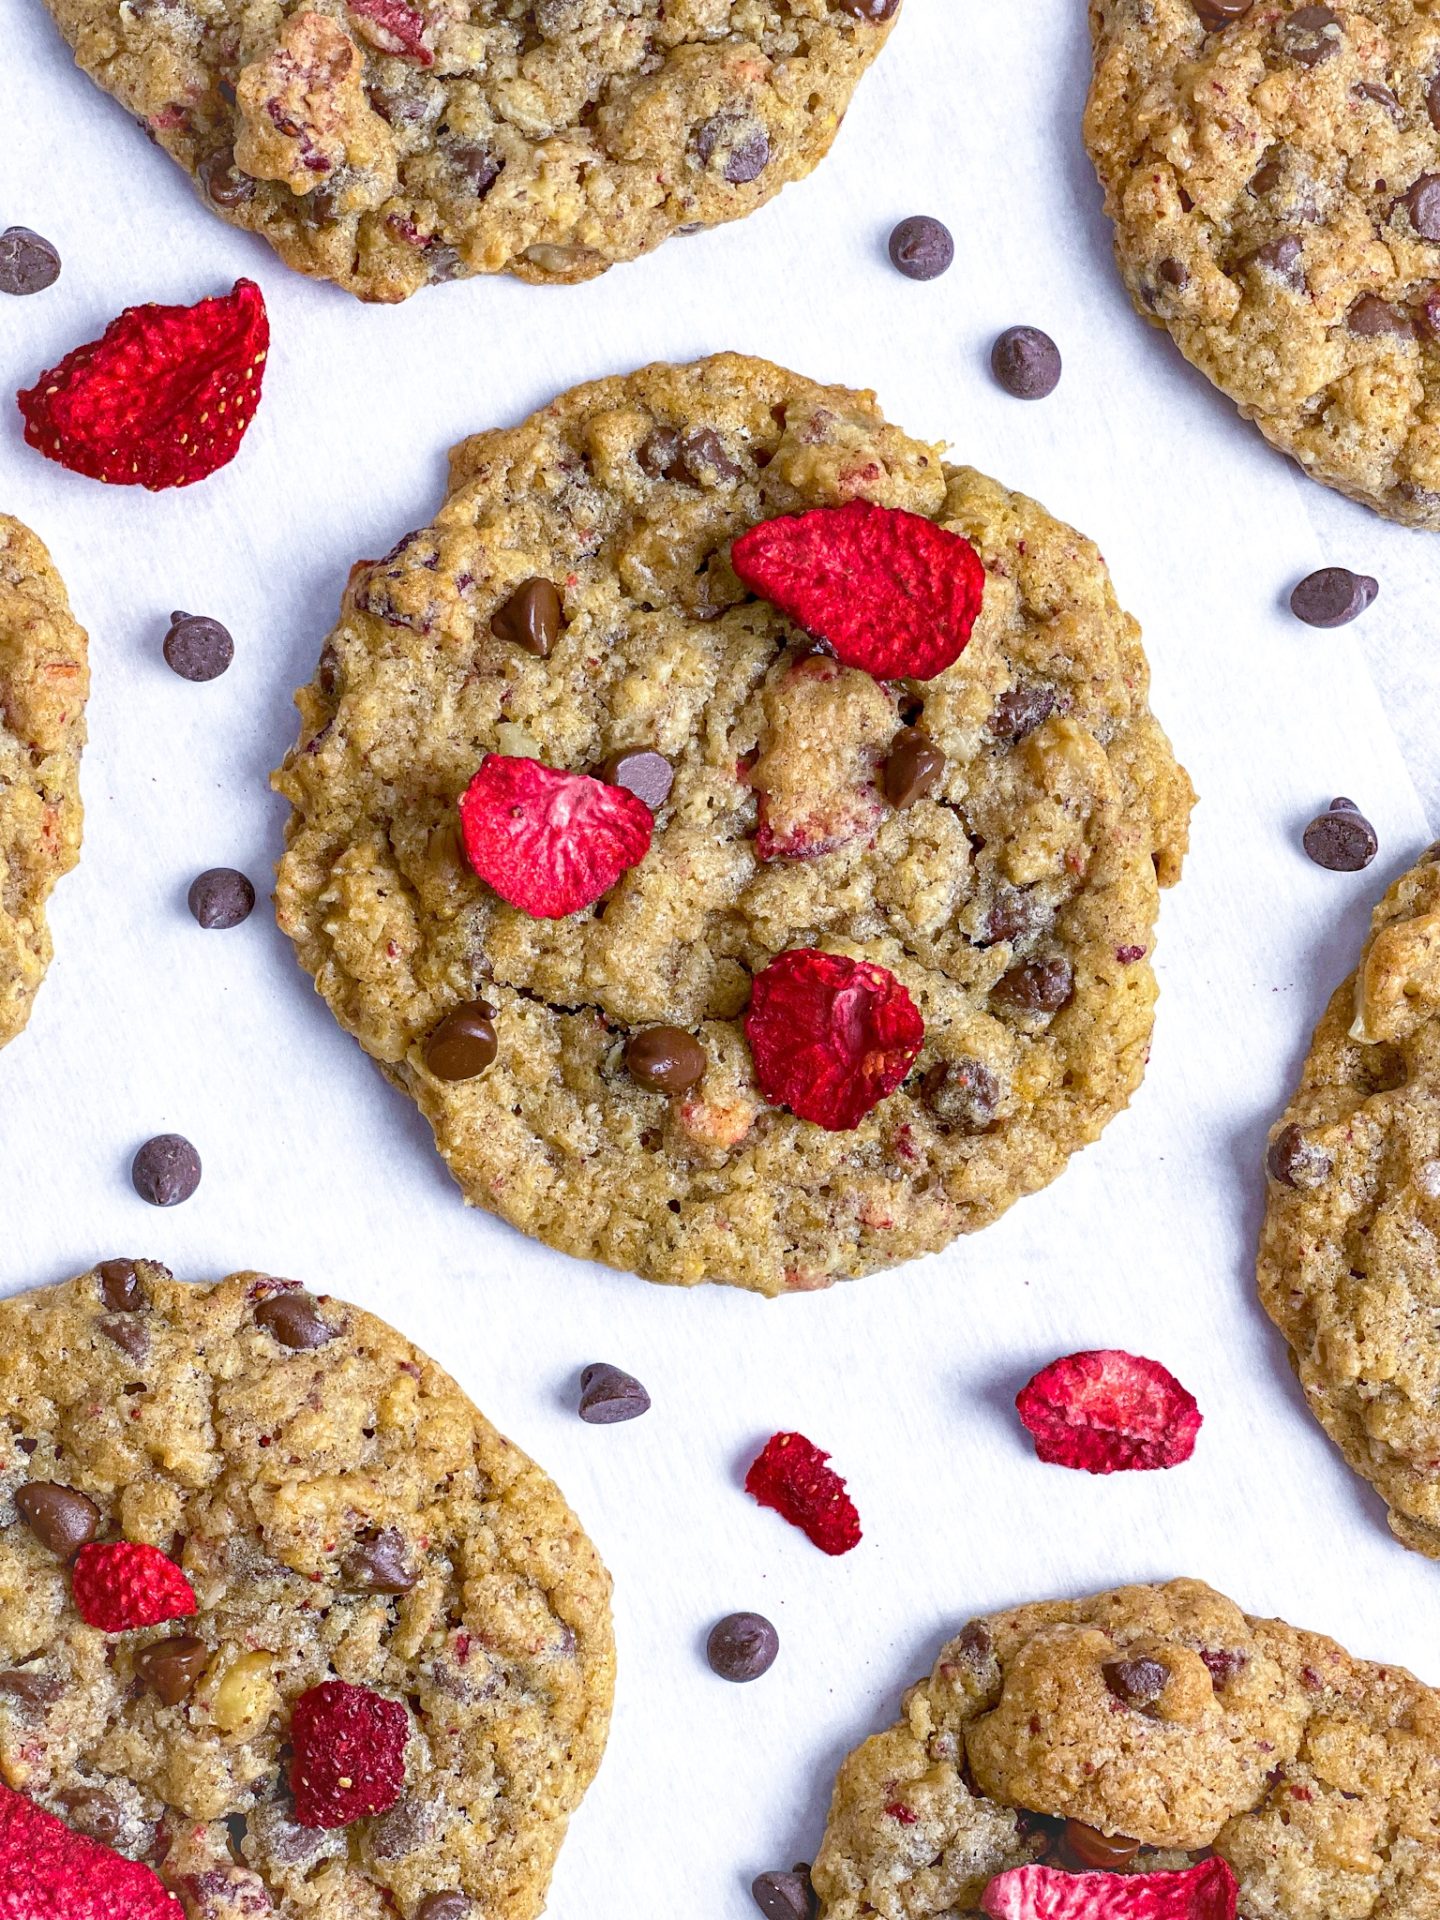 Strawberry chocolate chip cookies with freeze-dried strawberries and vegan chocolate chips